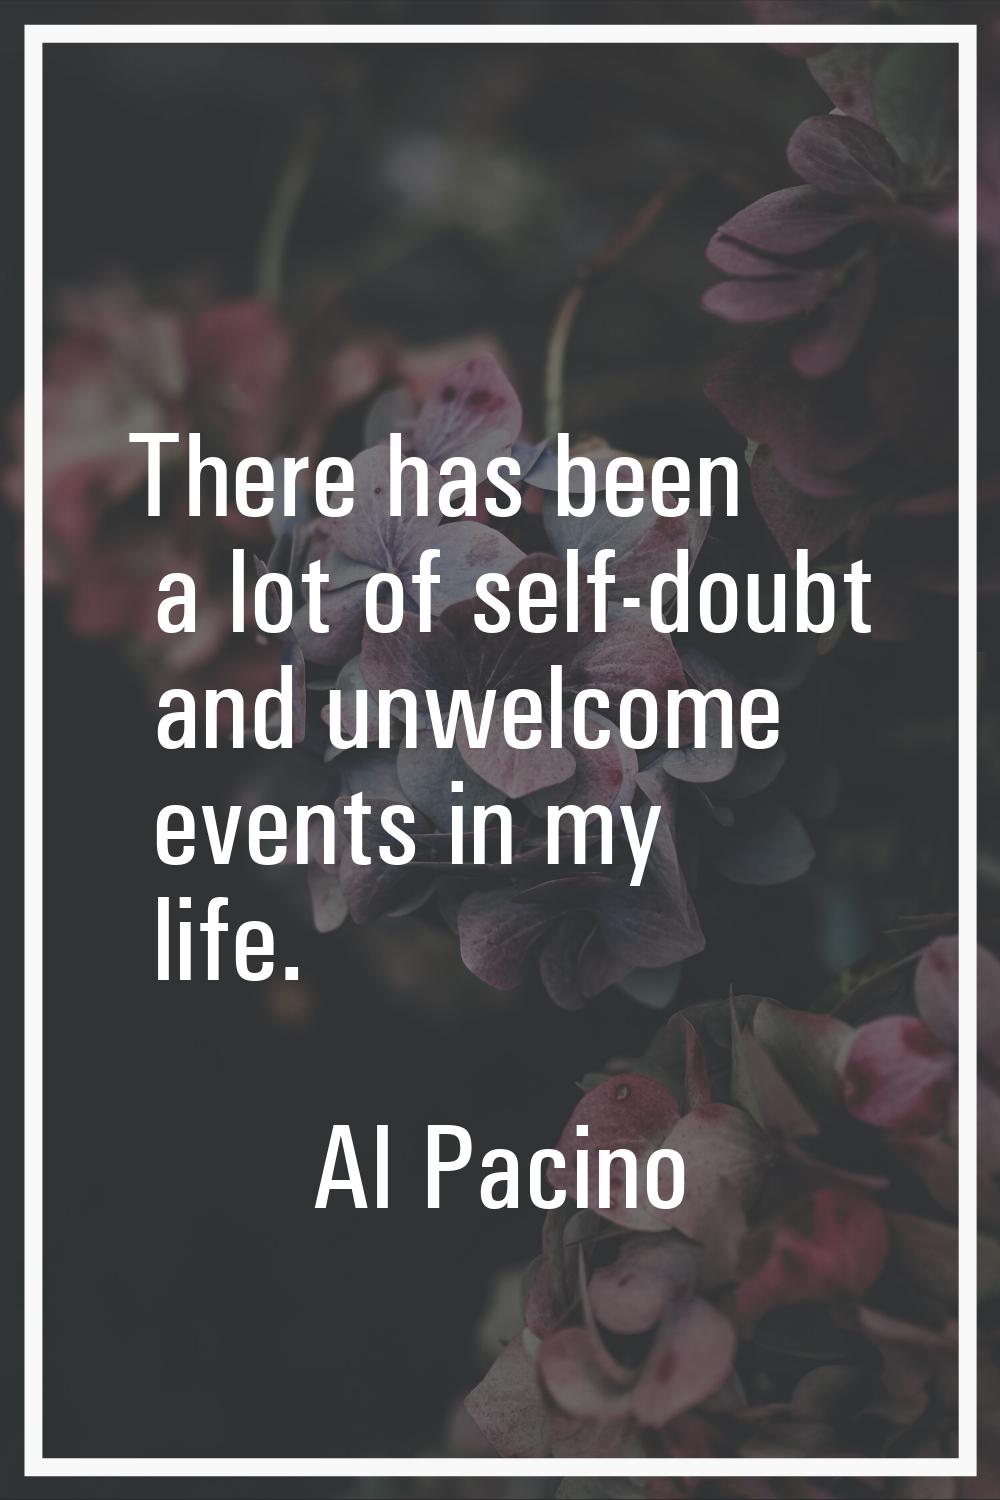 There has been a lot of self-doubt and unwelcome events in my life.